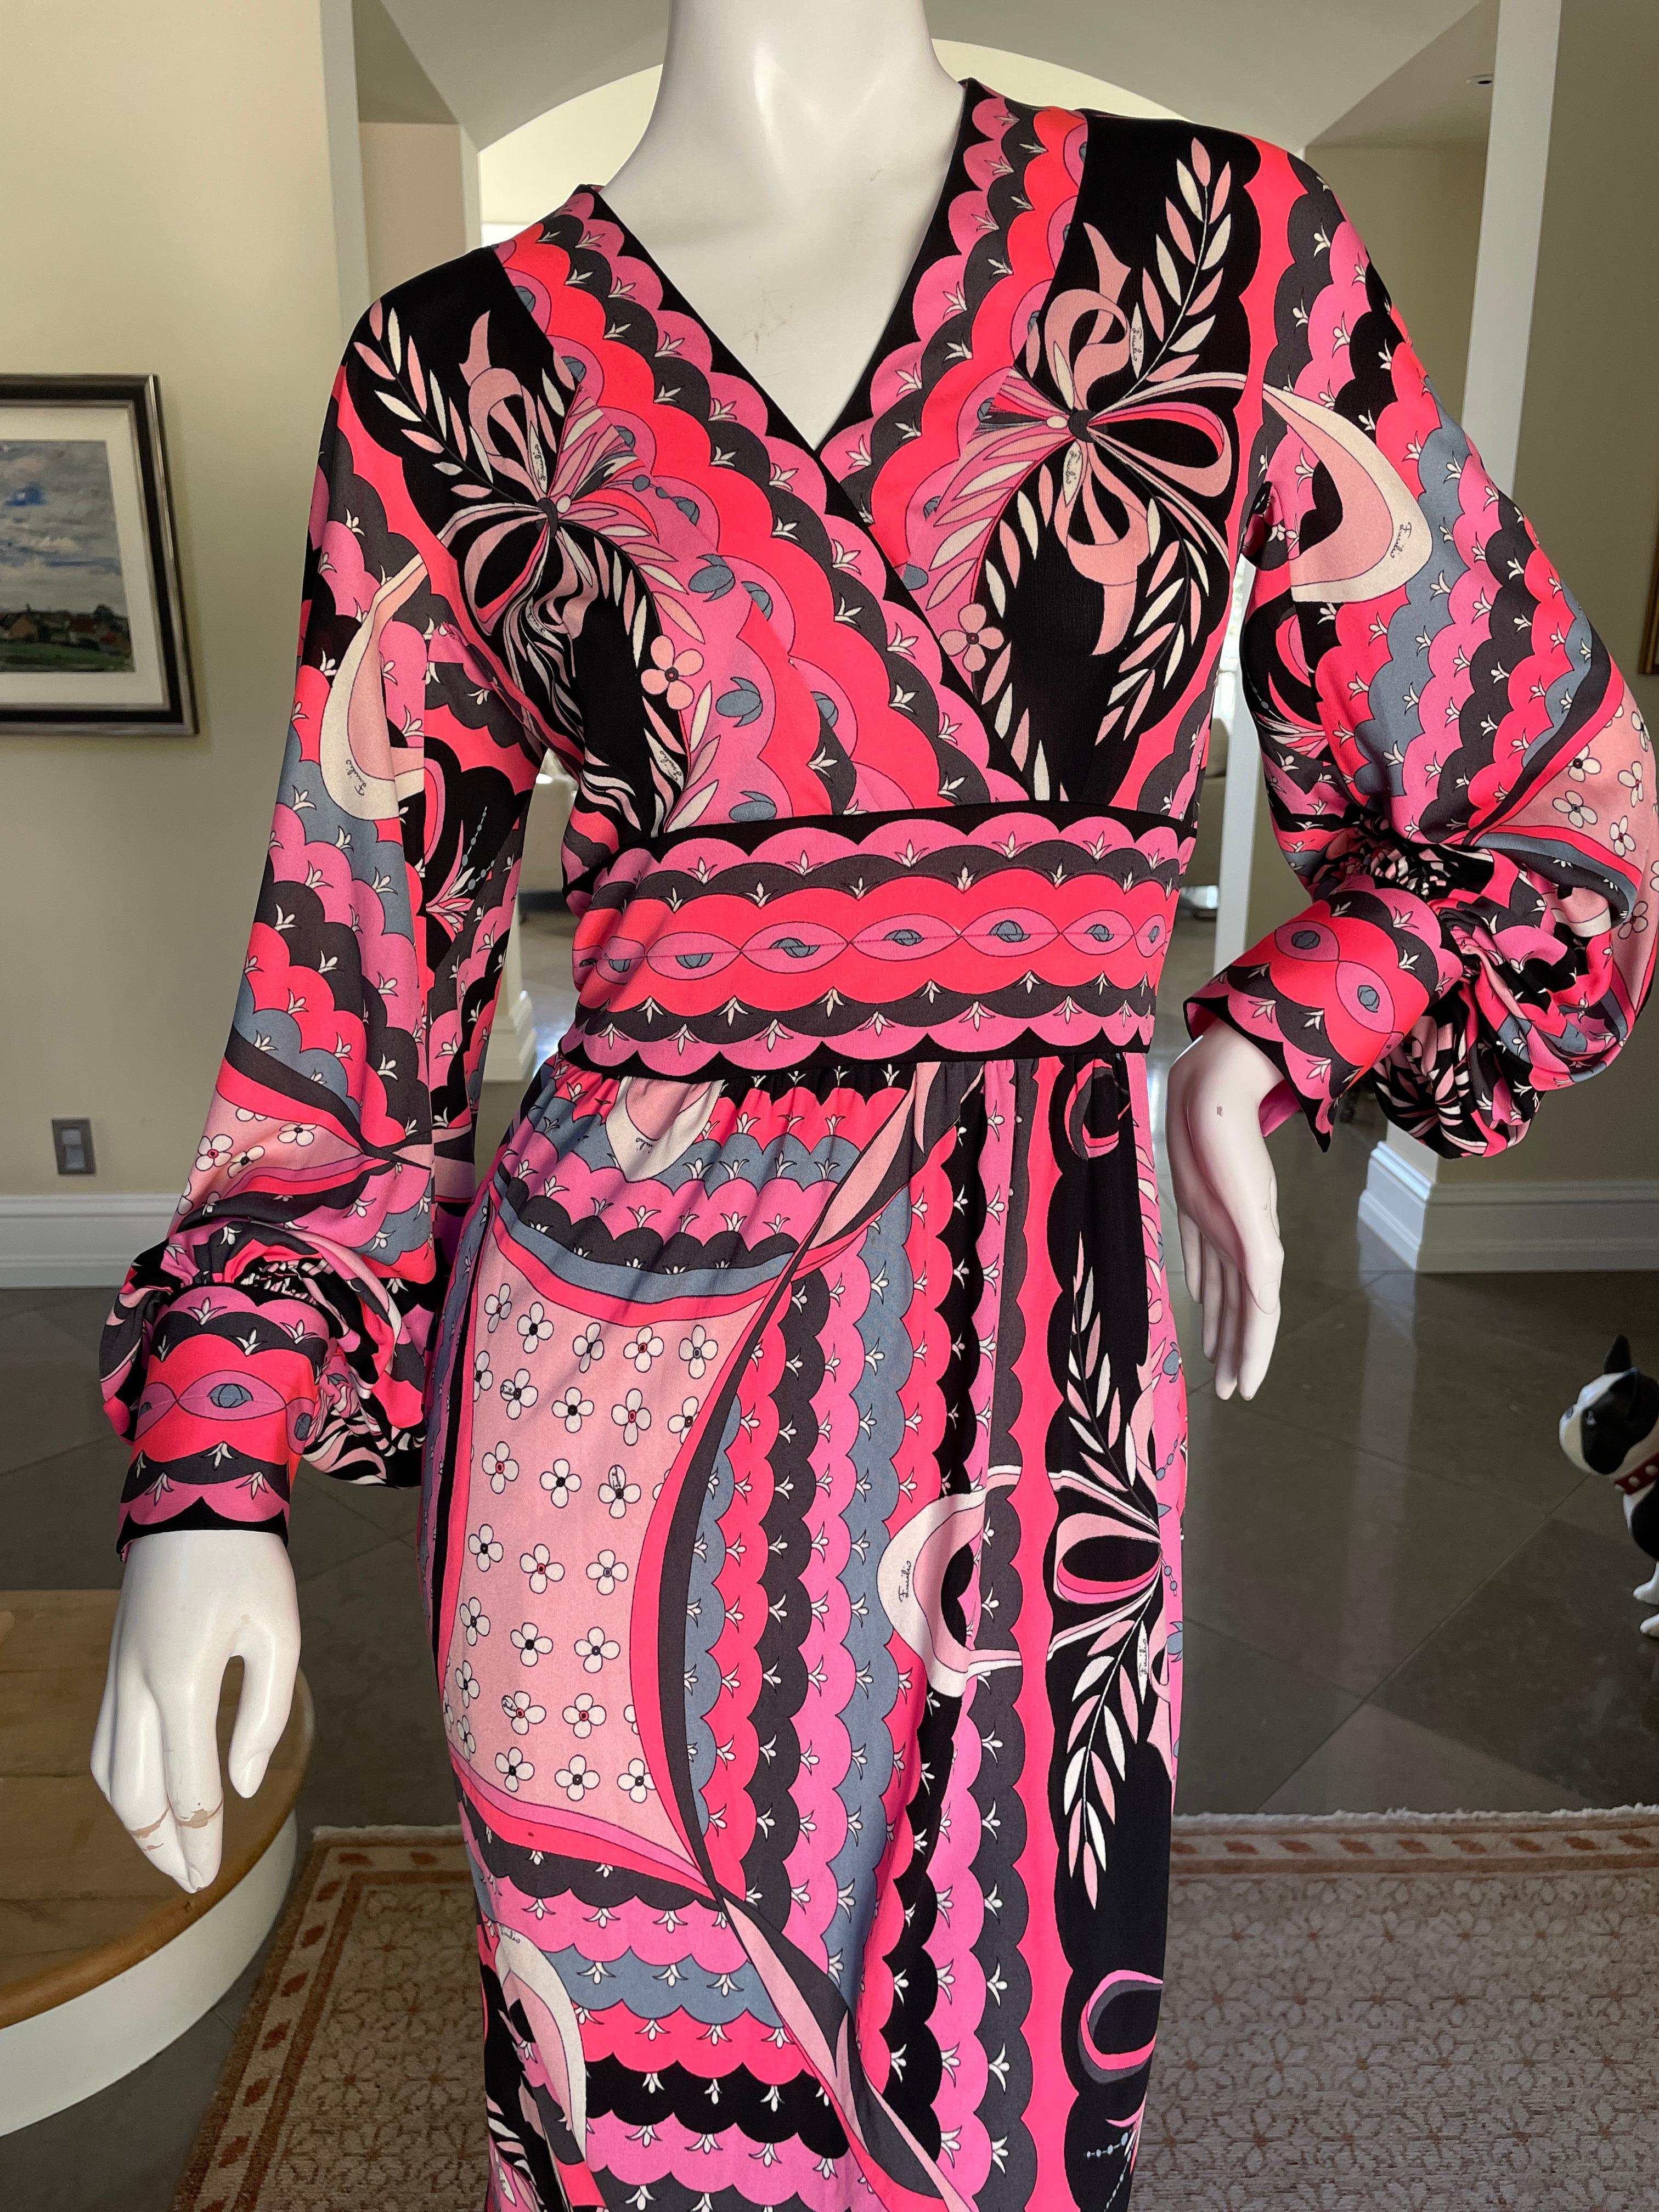 Pink Emilio Pucci Vintage 1960's Silk Jersey Dress from Saks Fifth Avenue